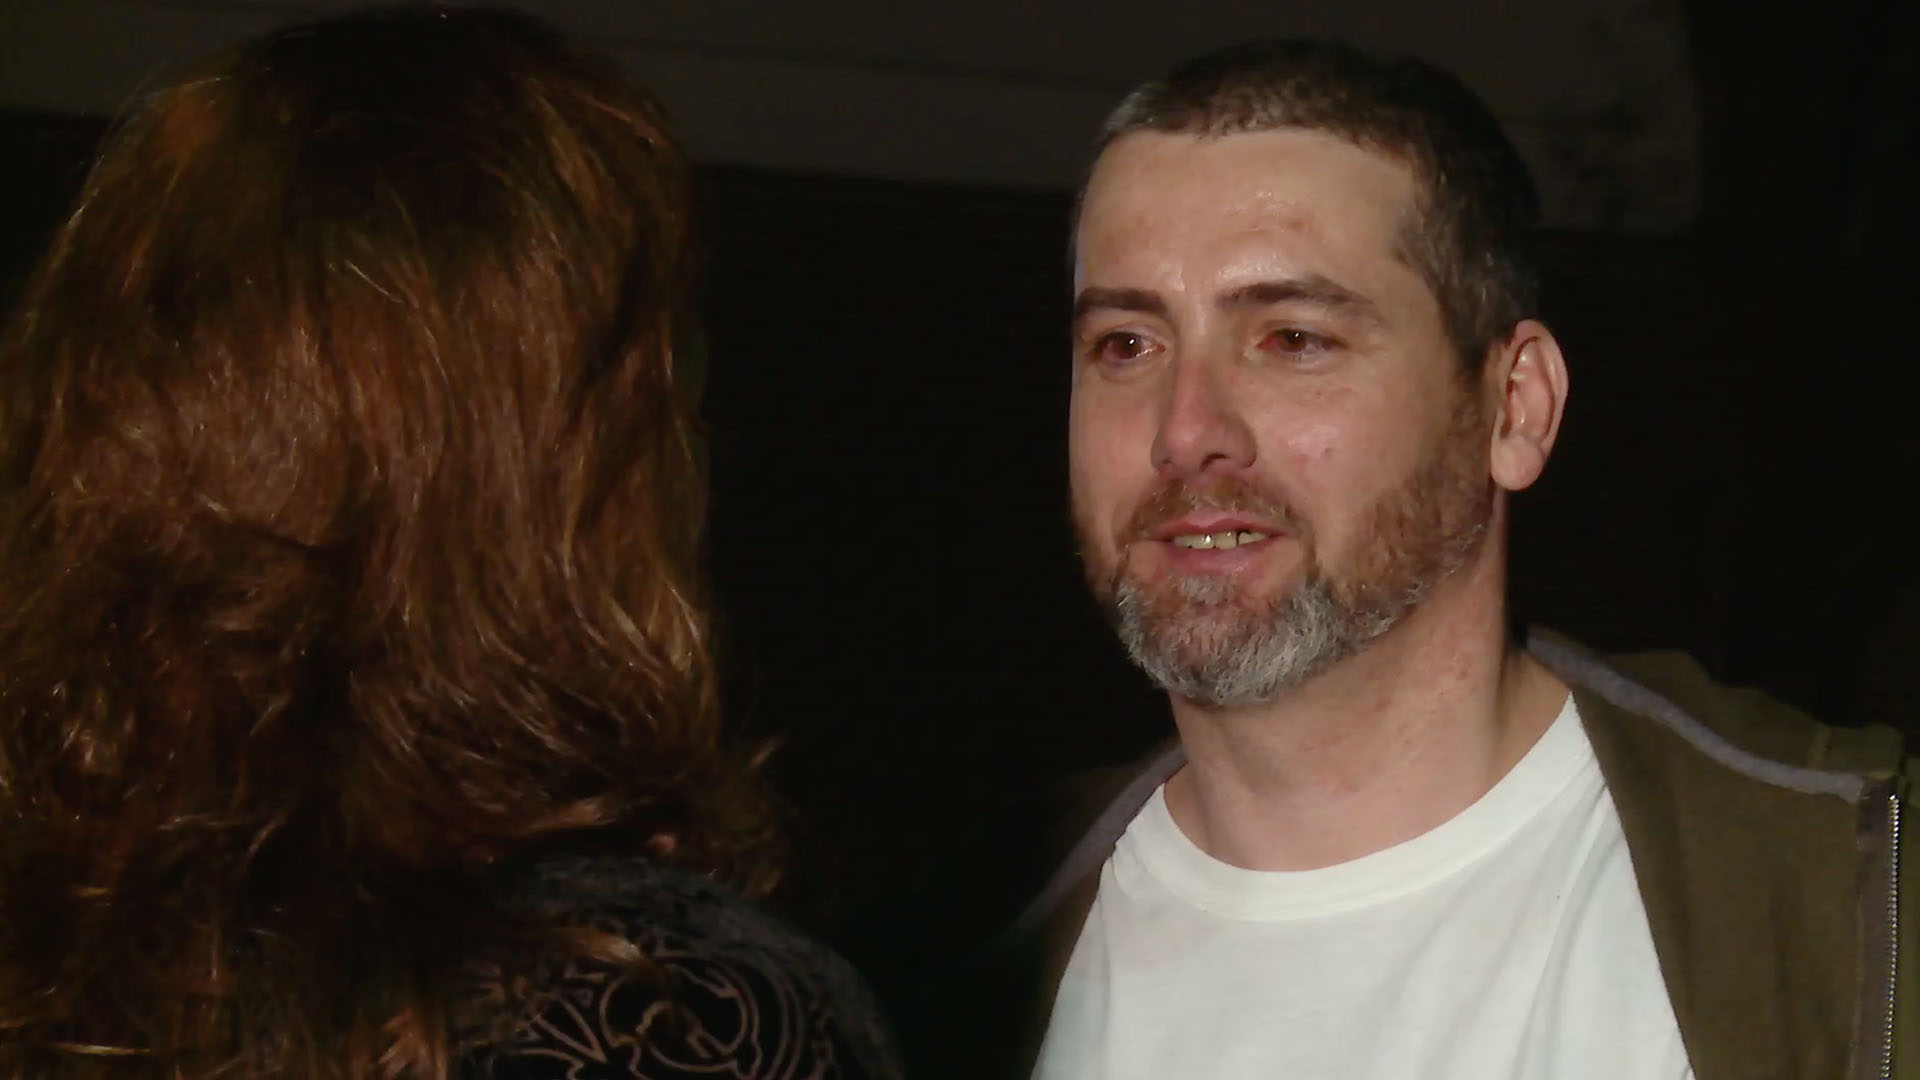 Watch Overheard: "I Had No Intentions to Live With Her!" | Love After Lockup Video Extras